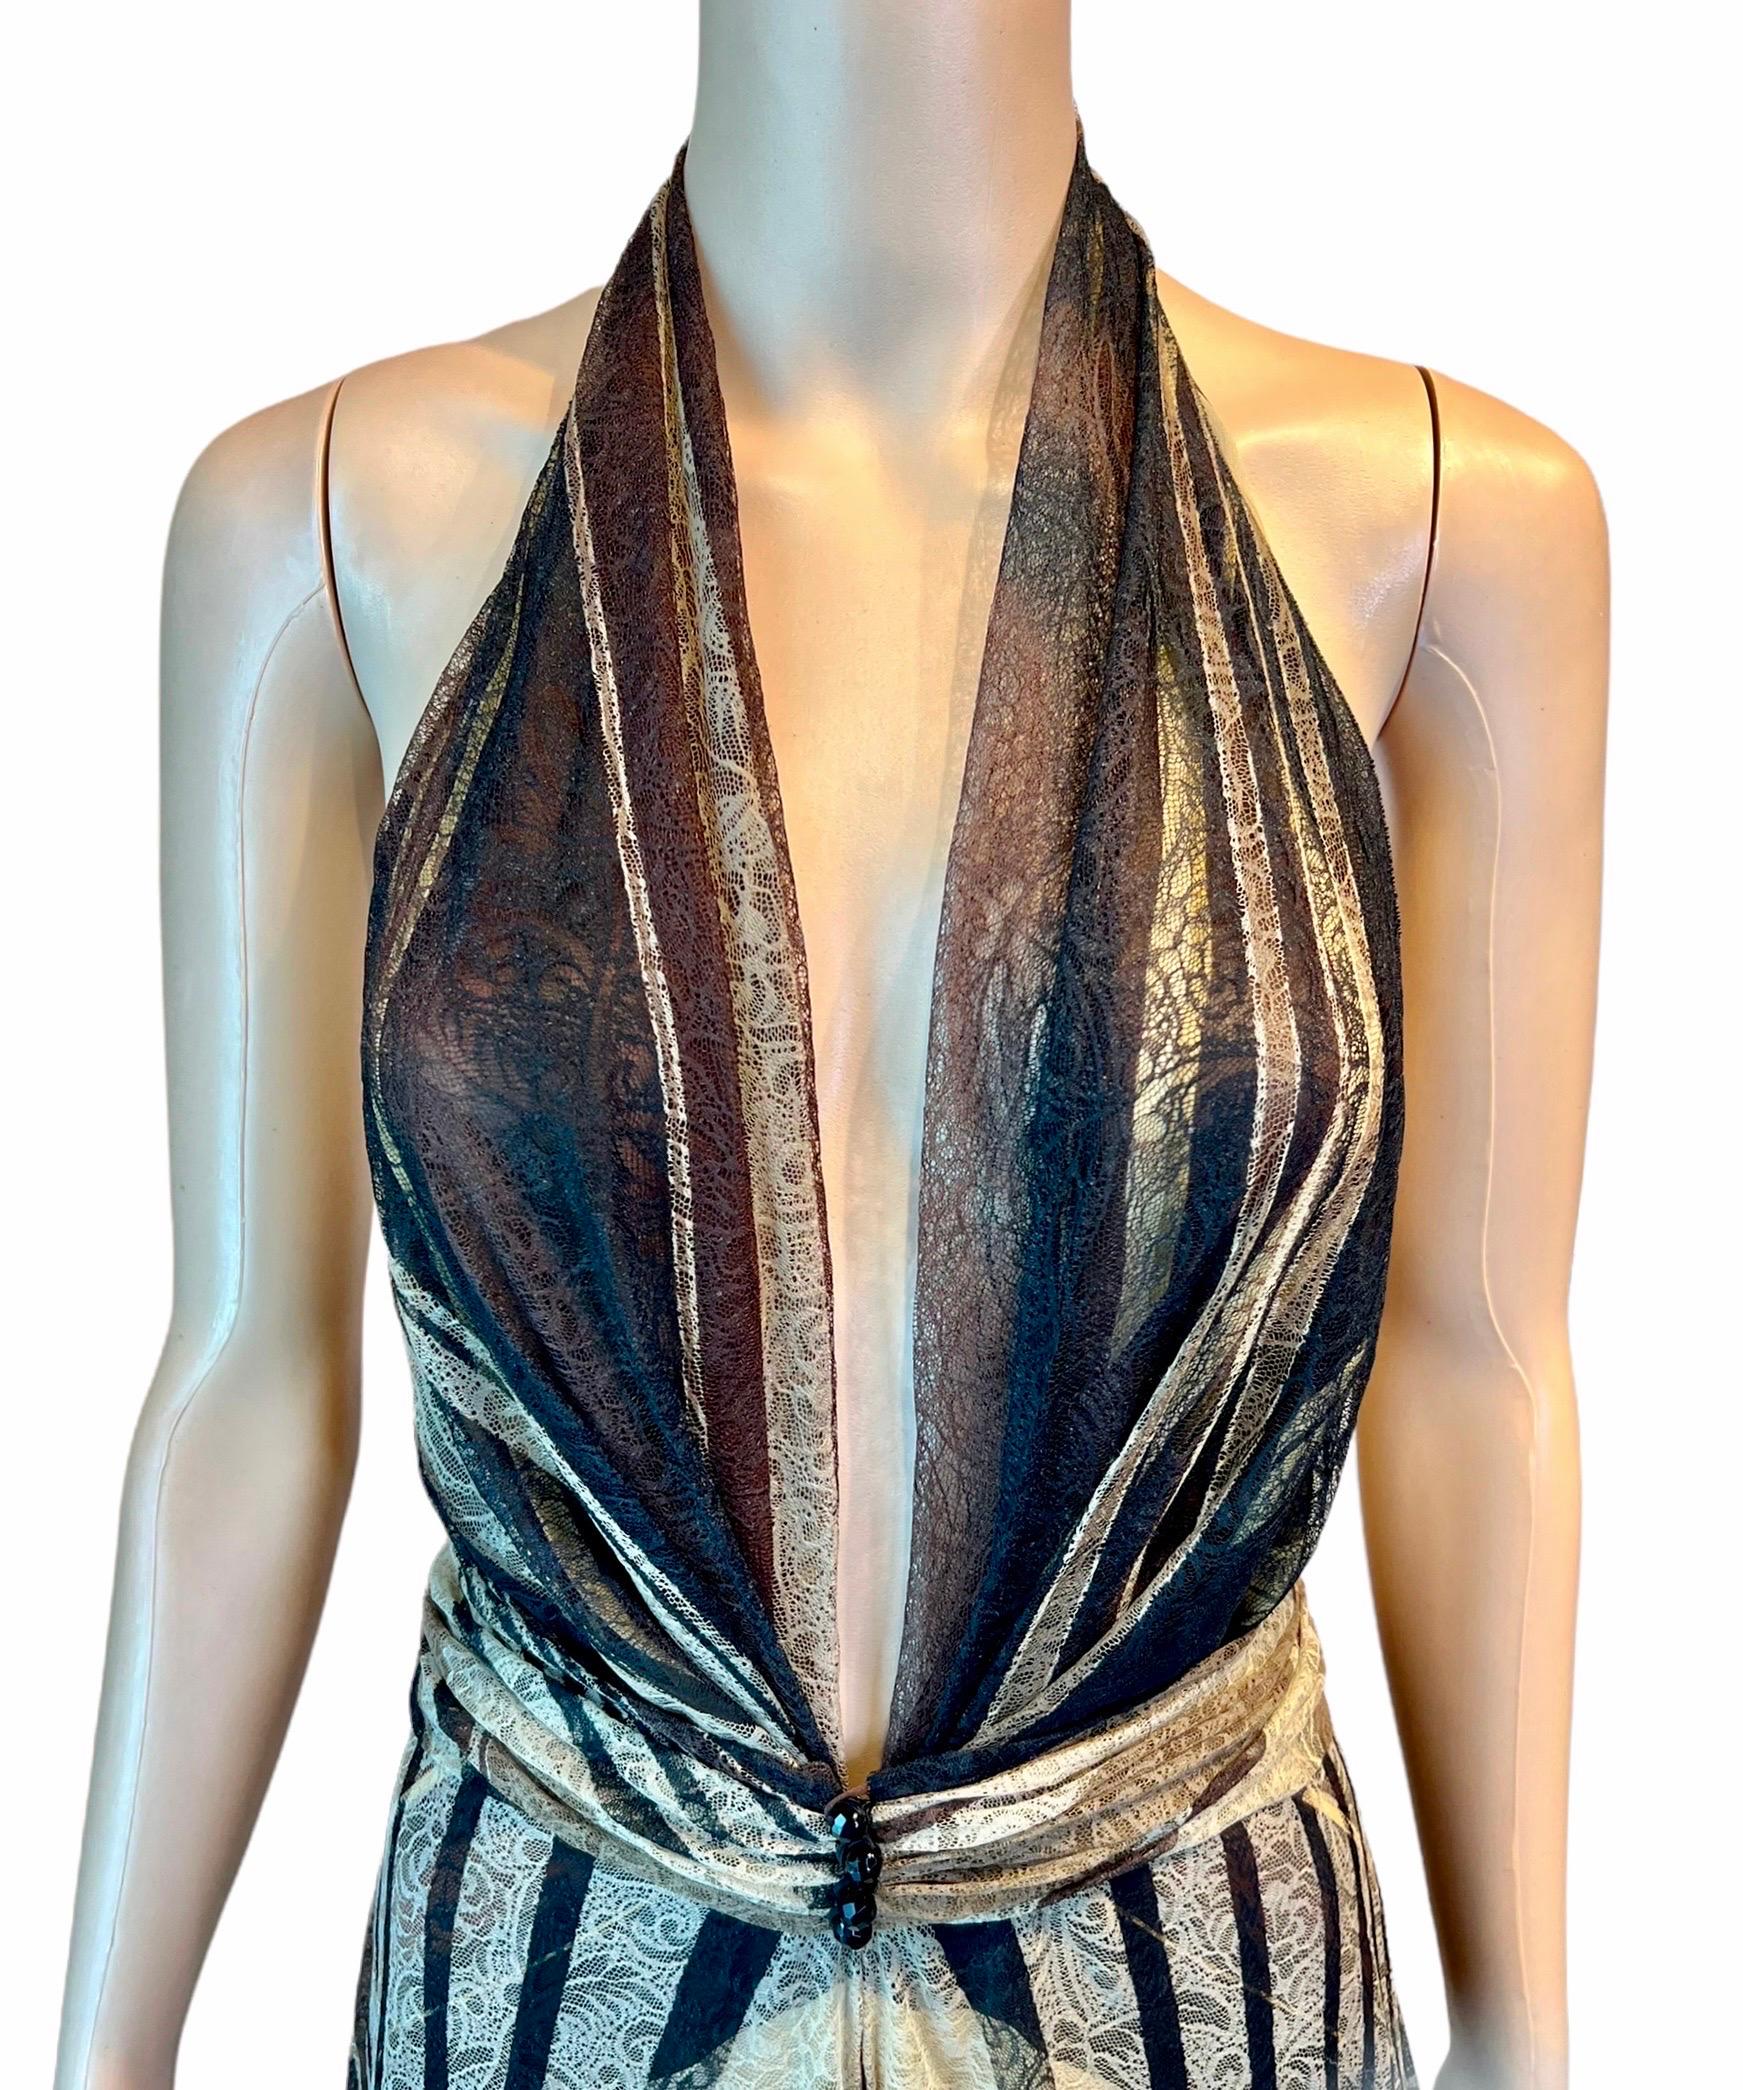 Gianni Versace F/W 2000 Runway Plunging Lace Silk Backless Evening Dress Gown In Good Condition For Sale In Naples, FL